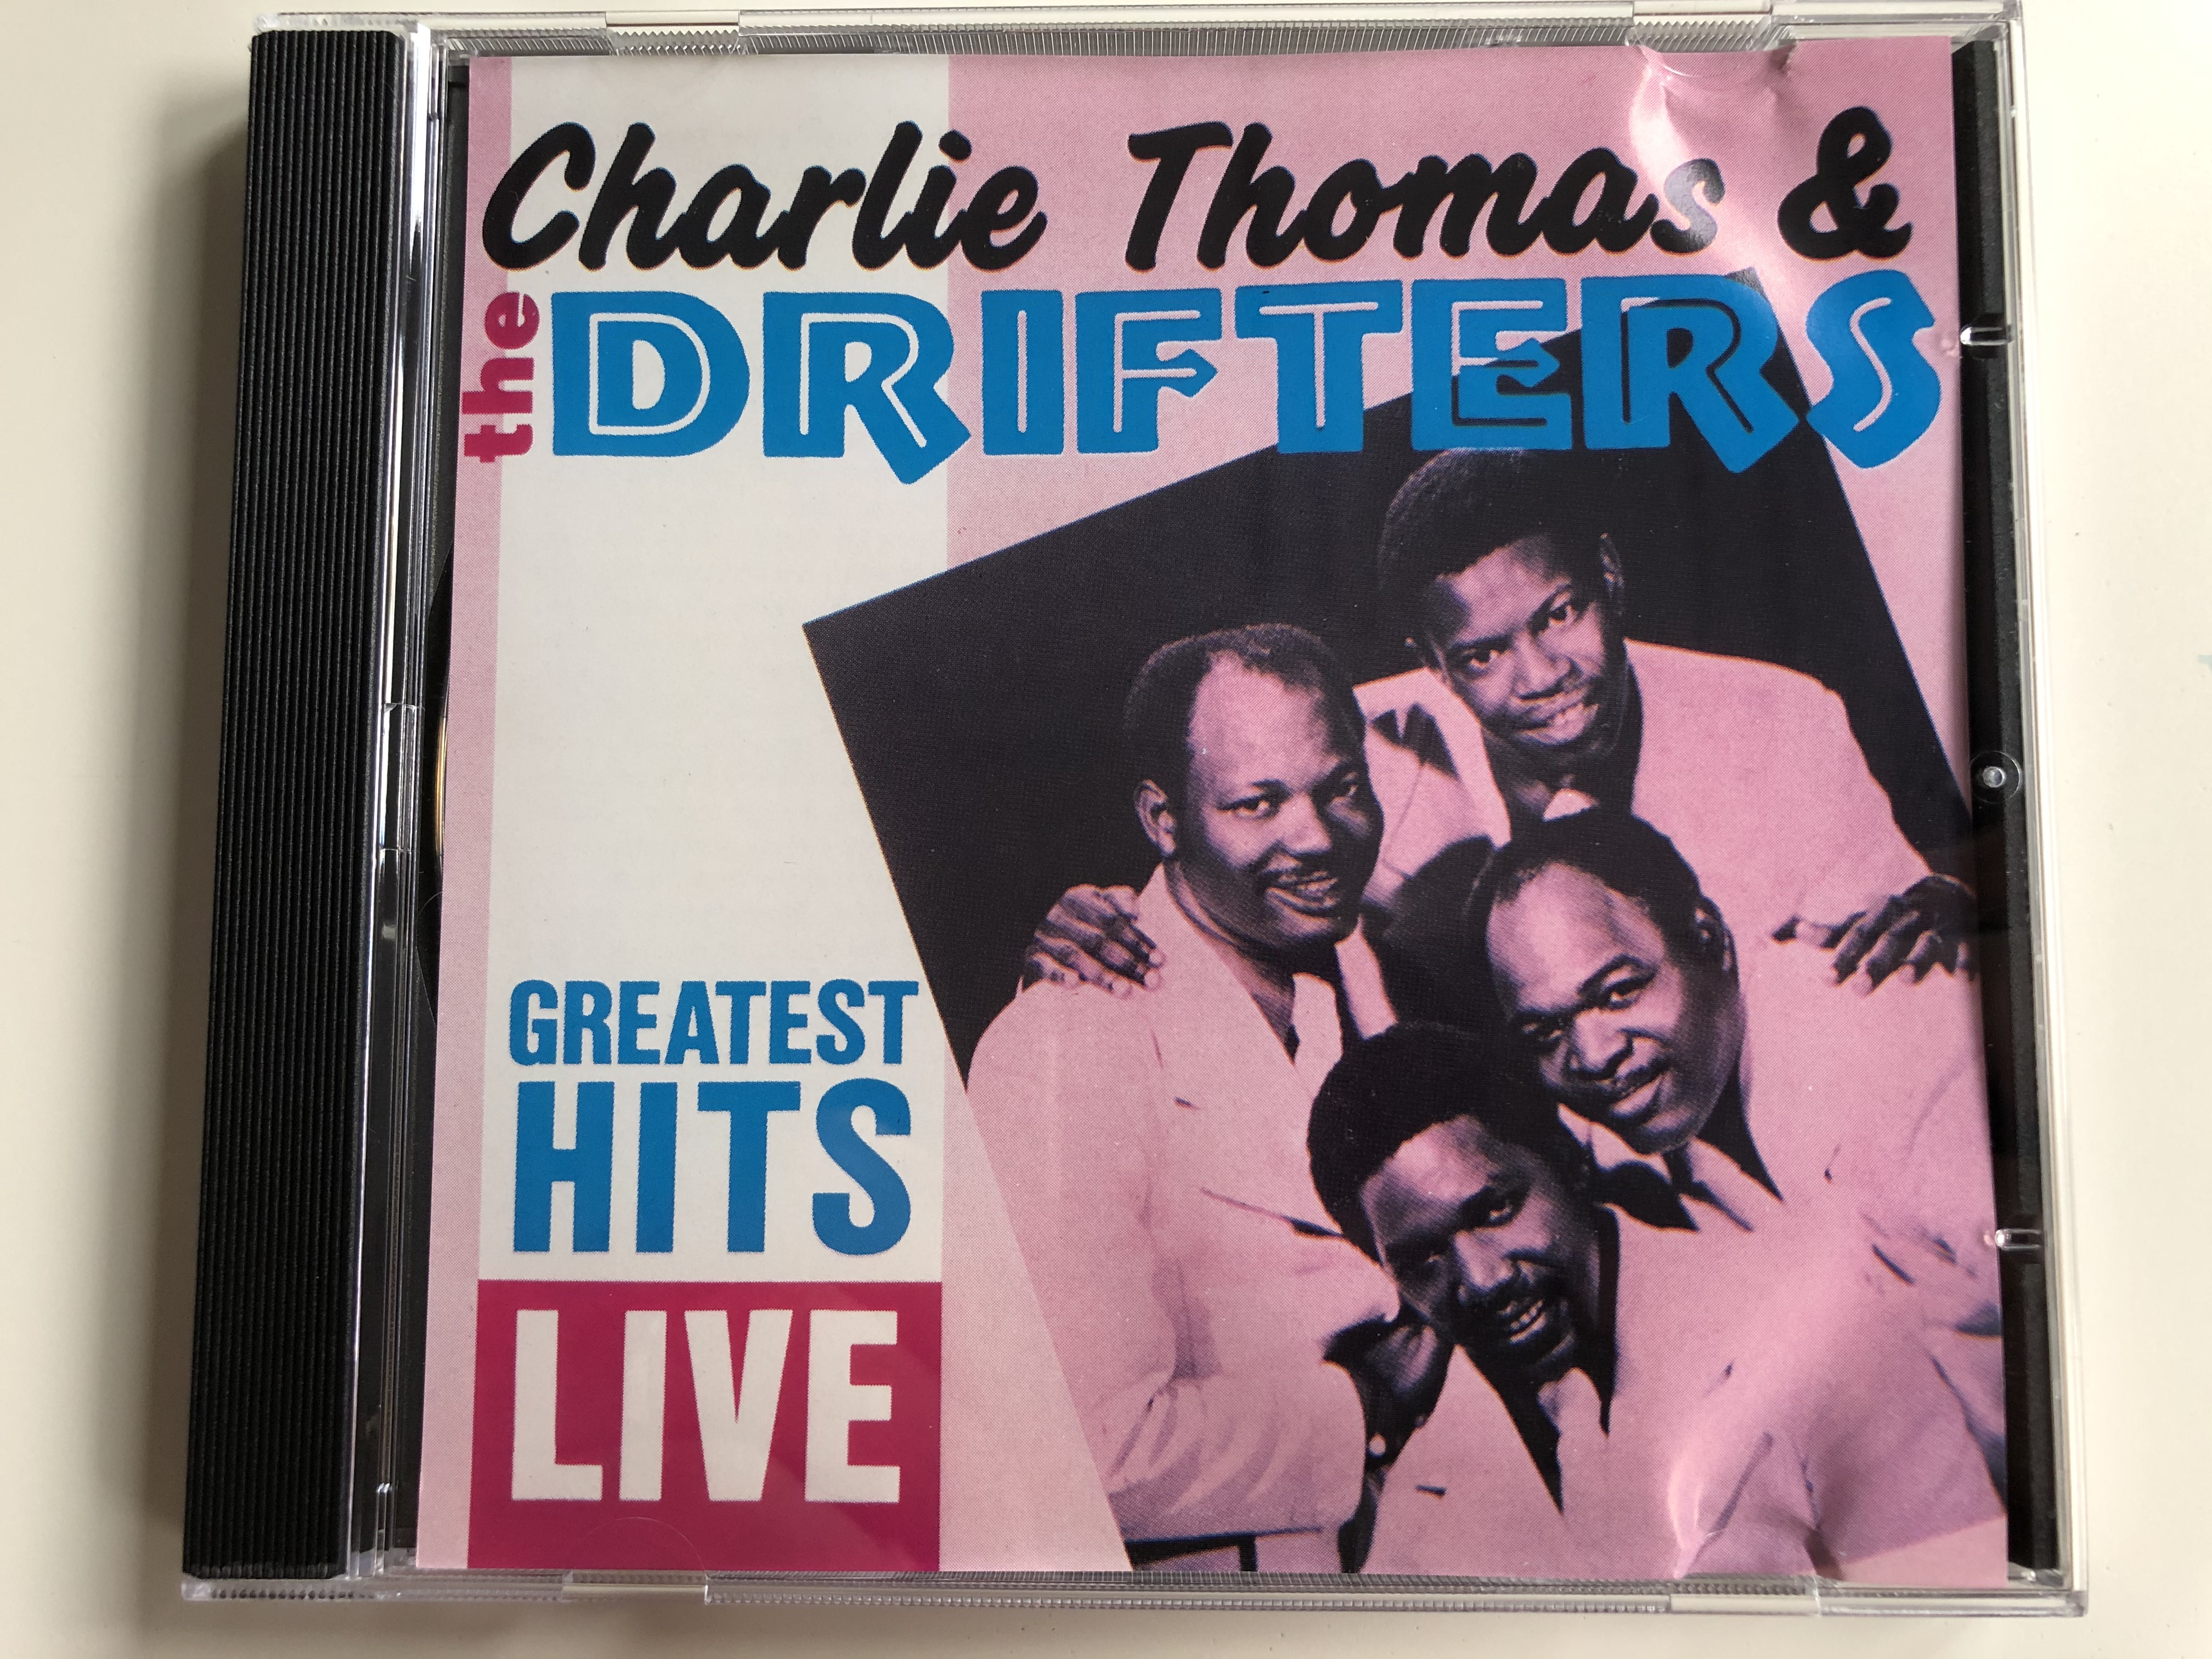 charlie-thomas-the-drifters-greatest-hits-live-arc-records-audio-cd-1986-top-143-1-.jpg